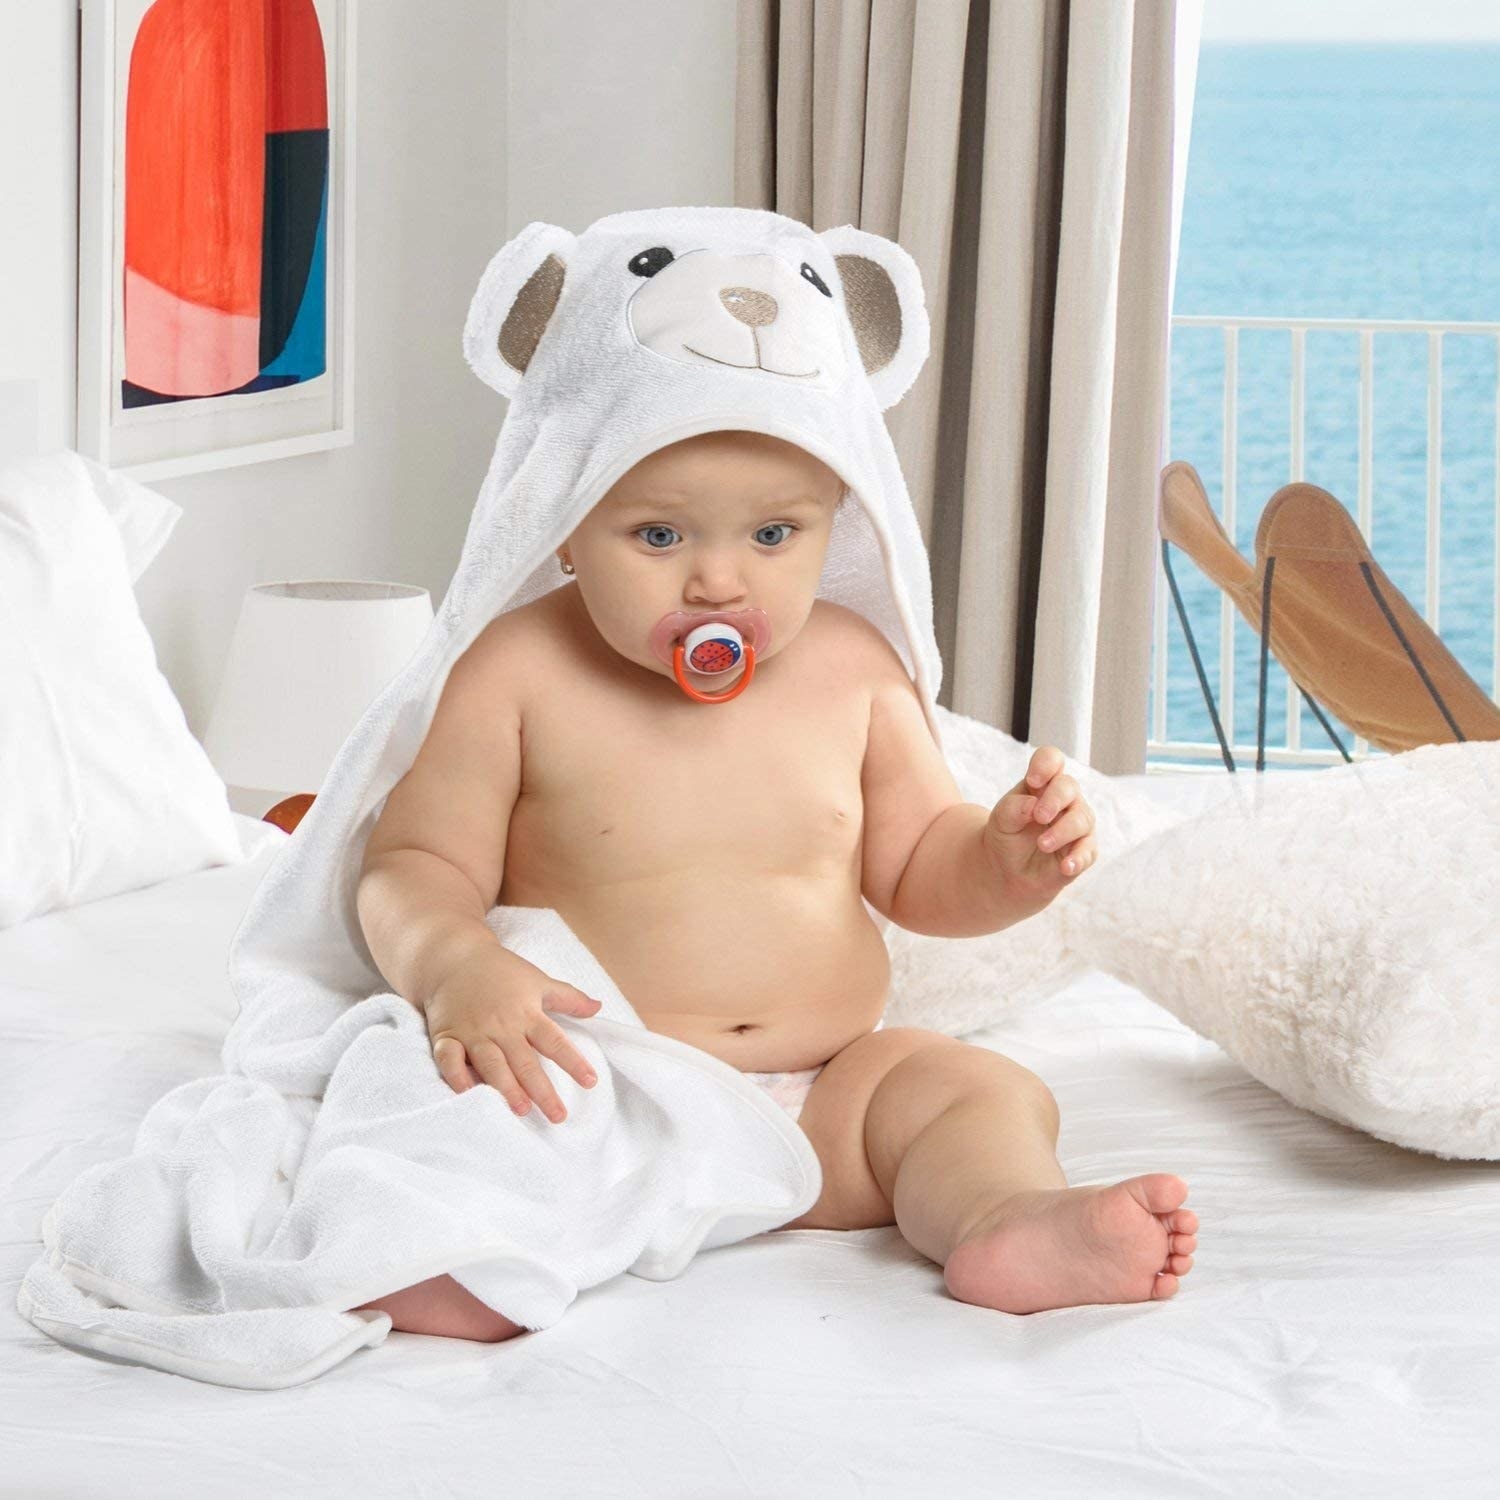 A baby on a bed wearing the towel